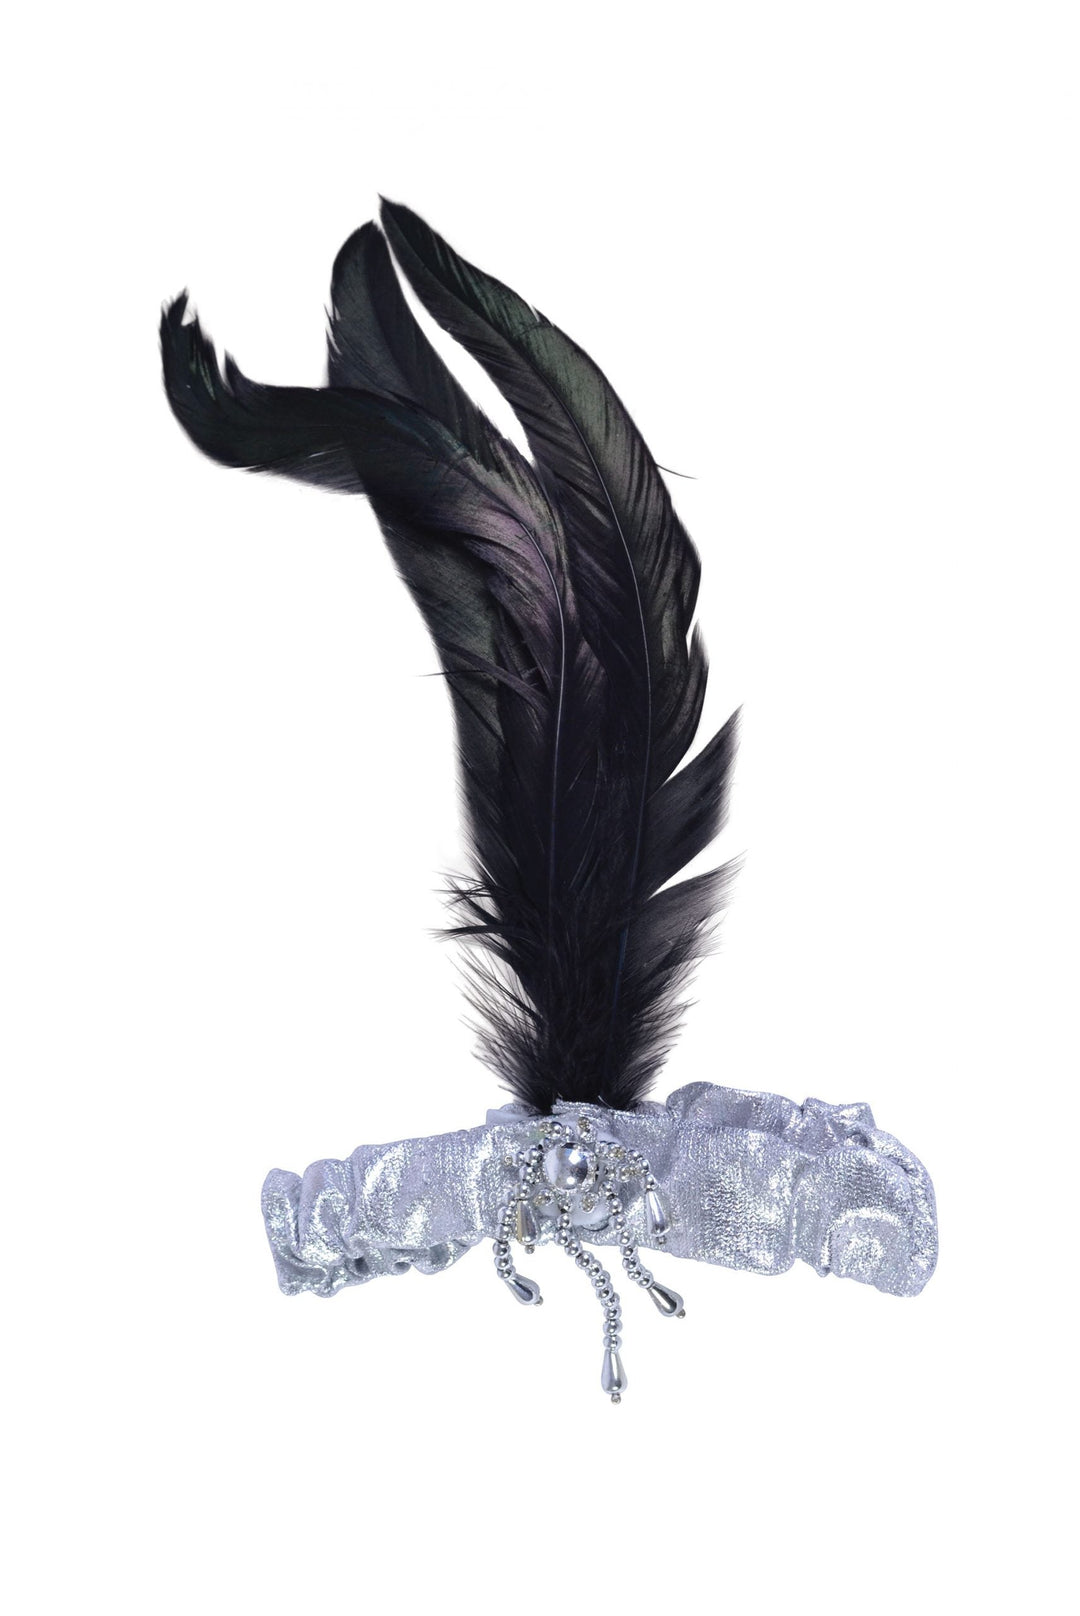 Silver Headband with Black Feathers 1920s Costume Accessory_1